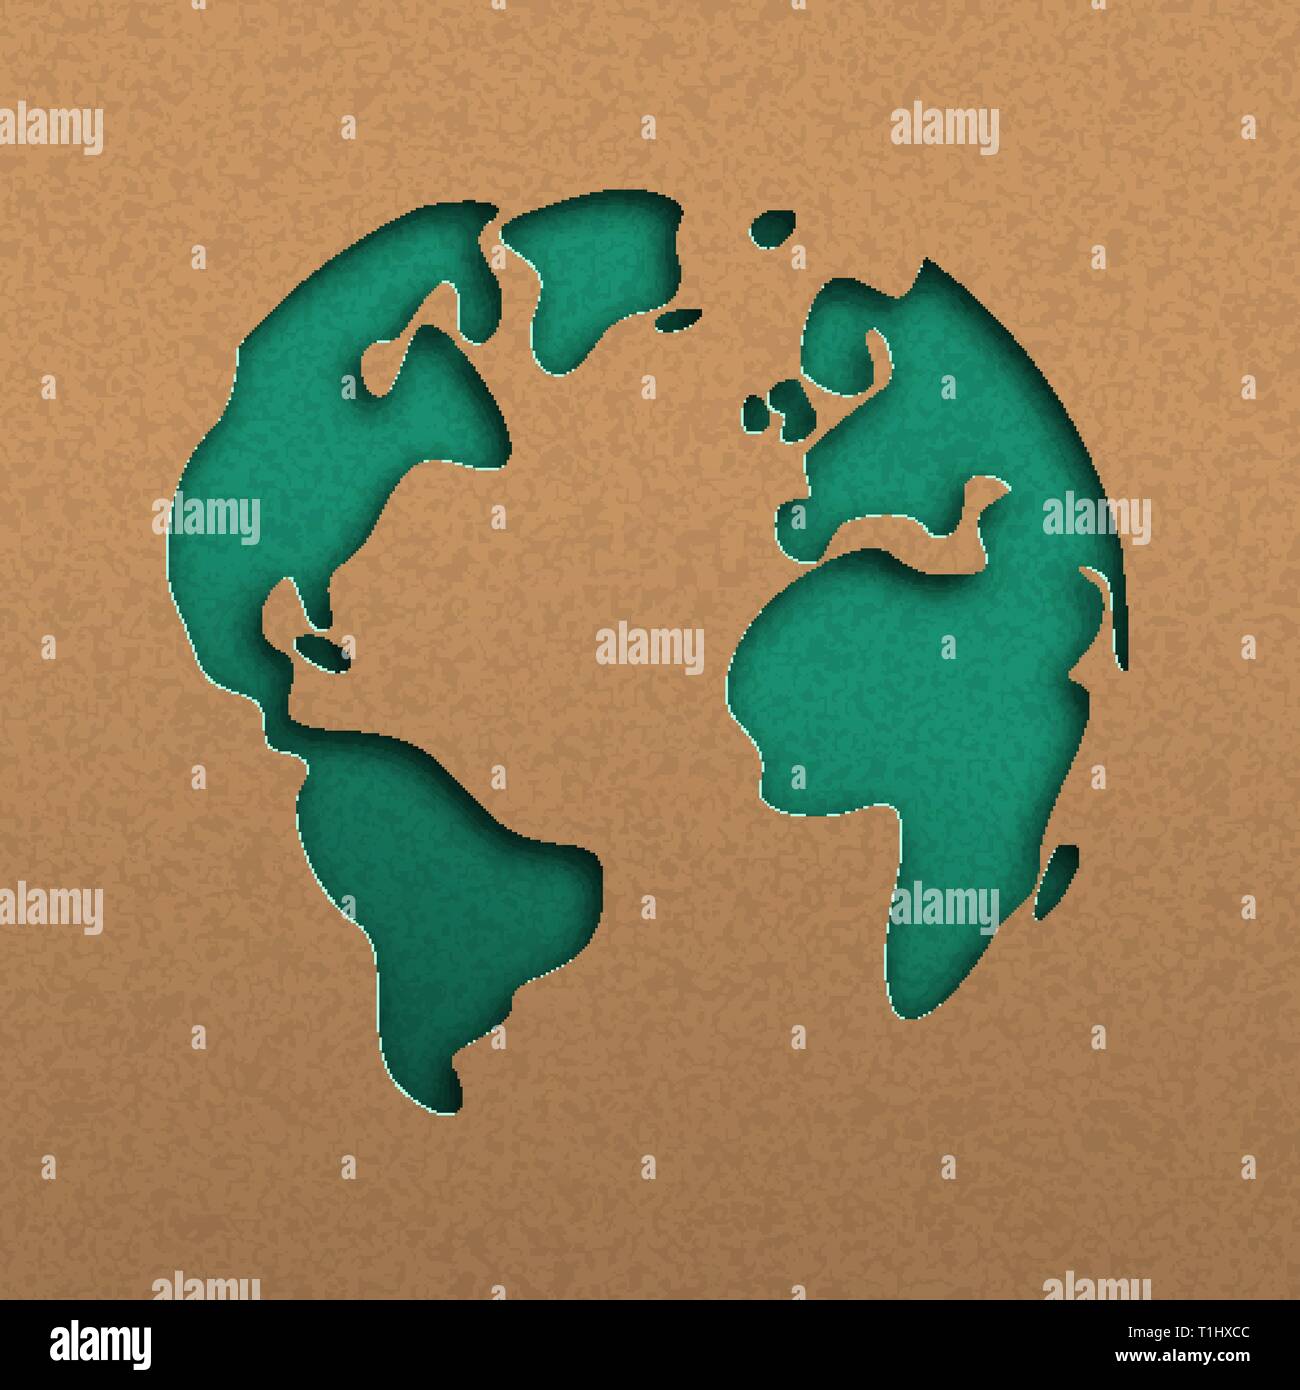 Papercut world map illustration. Green cutout earth in recycled paper for planet conservation awareness. Stock Vector